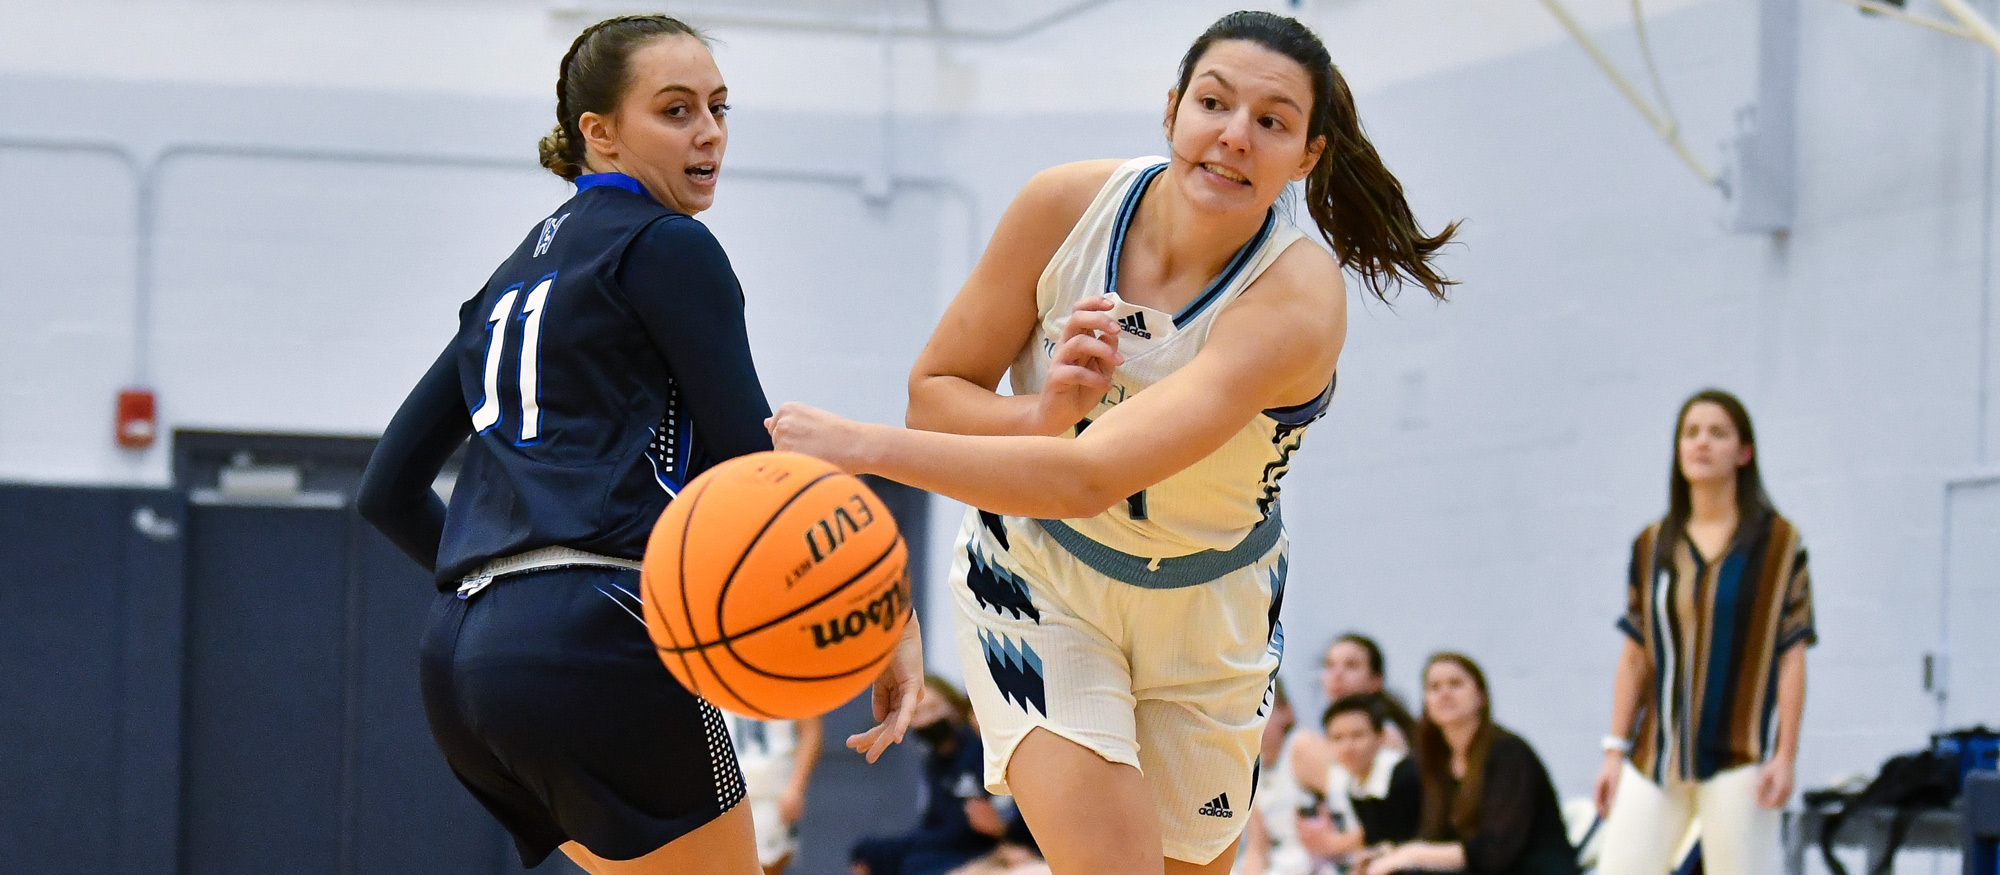 Isabel Cordes had seven rebounds to help Mount Holyoke outperform Wellesley on the glass in a NEWMAC loss on Jan. 18, 2023. (RJB Sports file photo)